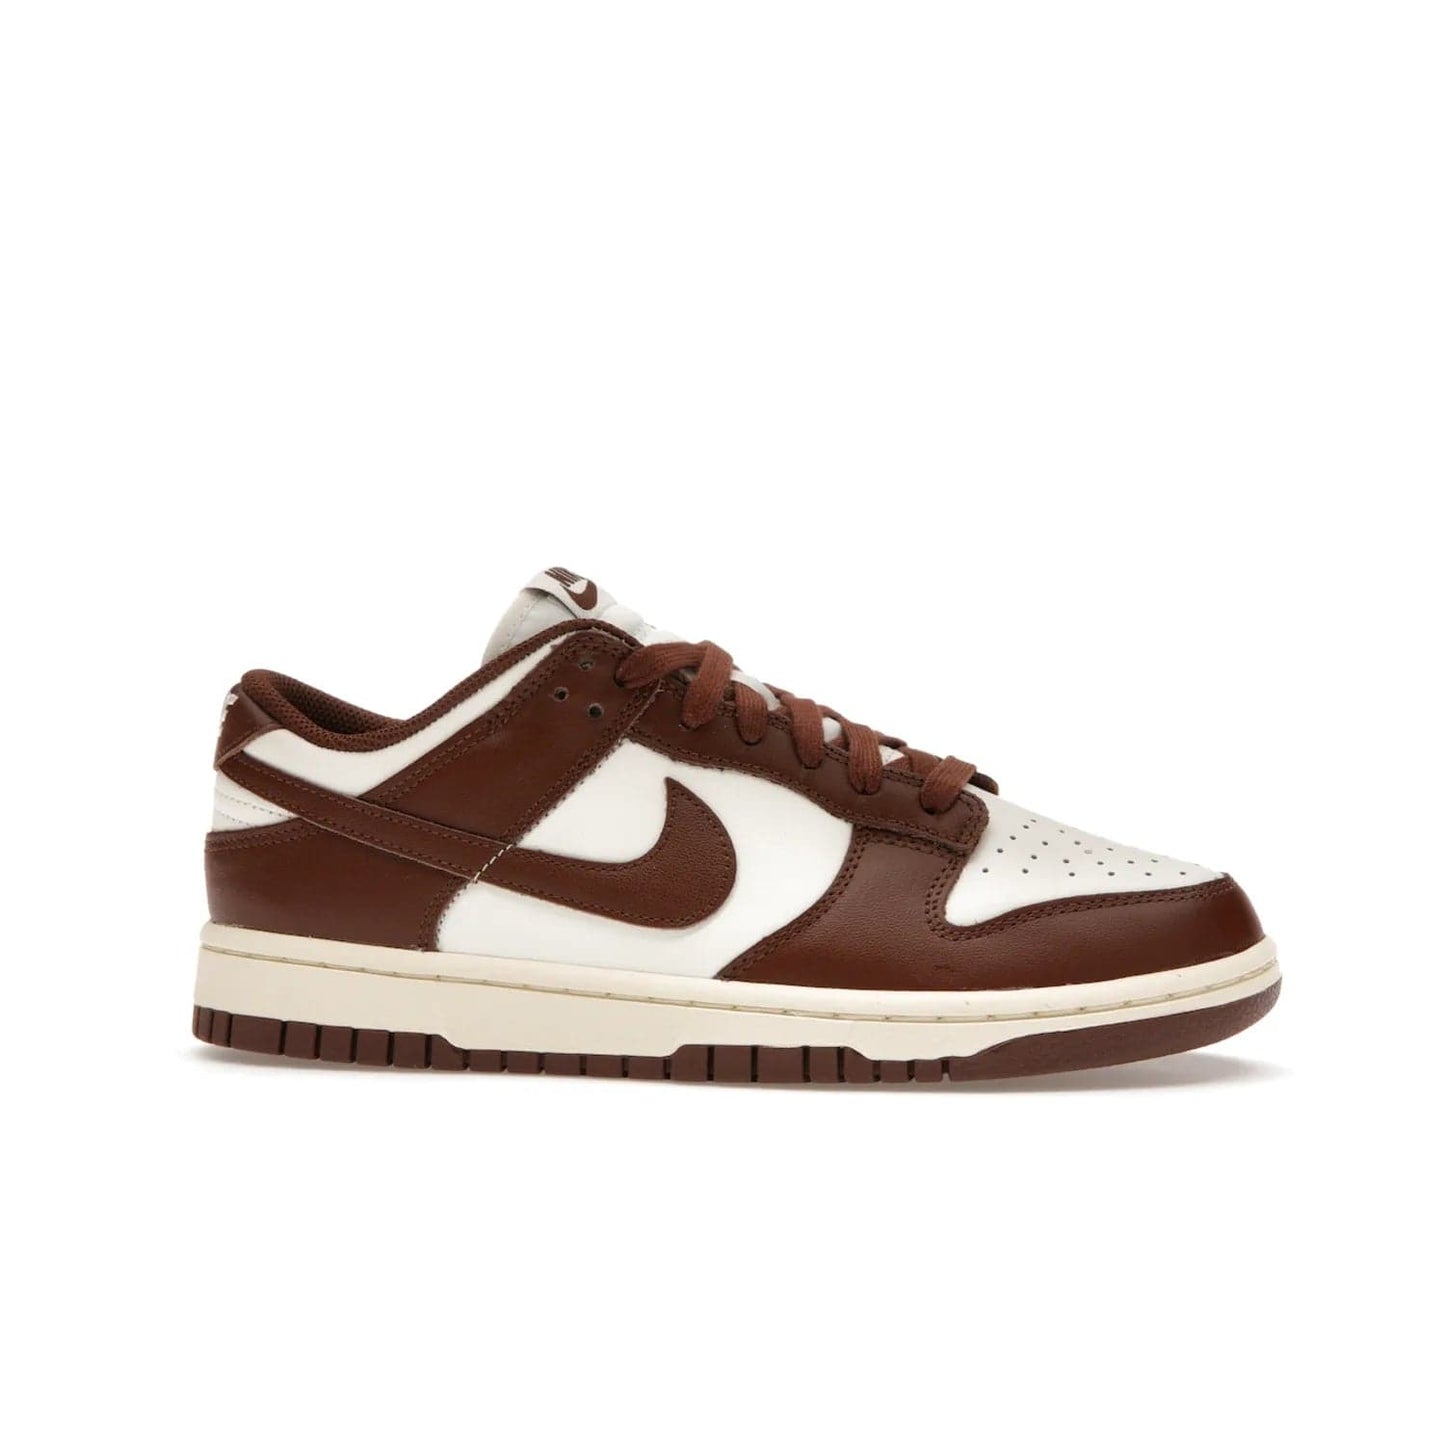 Nike Dunk Low Cacao Wow (Women's) - Image 2 - Only at www.BallersClubKickz.com - Revised
Get the Nike Dunk Low Cacao Wow and make a statement! Plush leather and a cool Cacao Wow finish bring together a unique mix of comfort and fashion that will turn heads. Boosted with a Coconut Milk hue. Shop today.